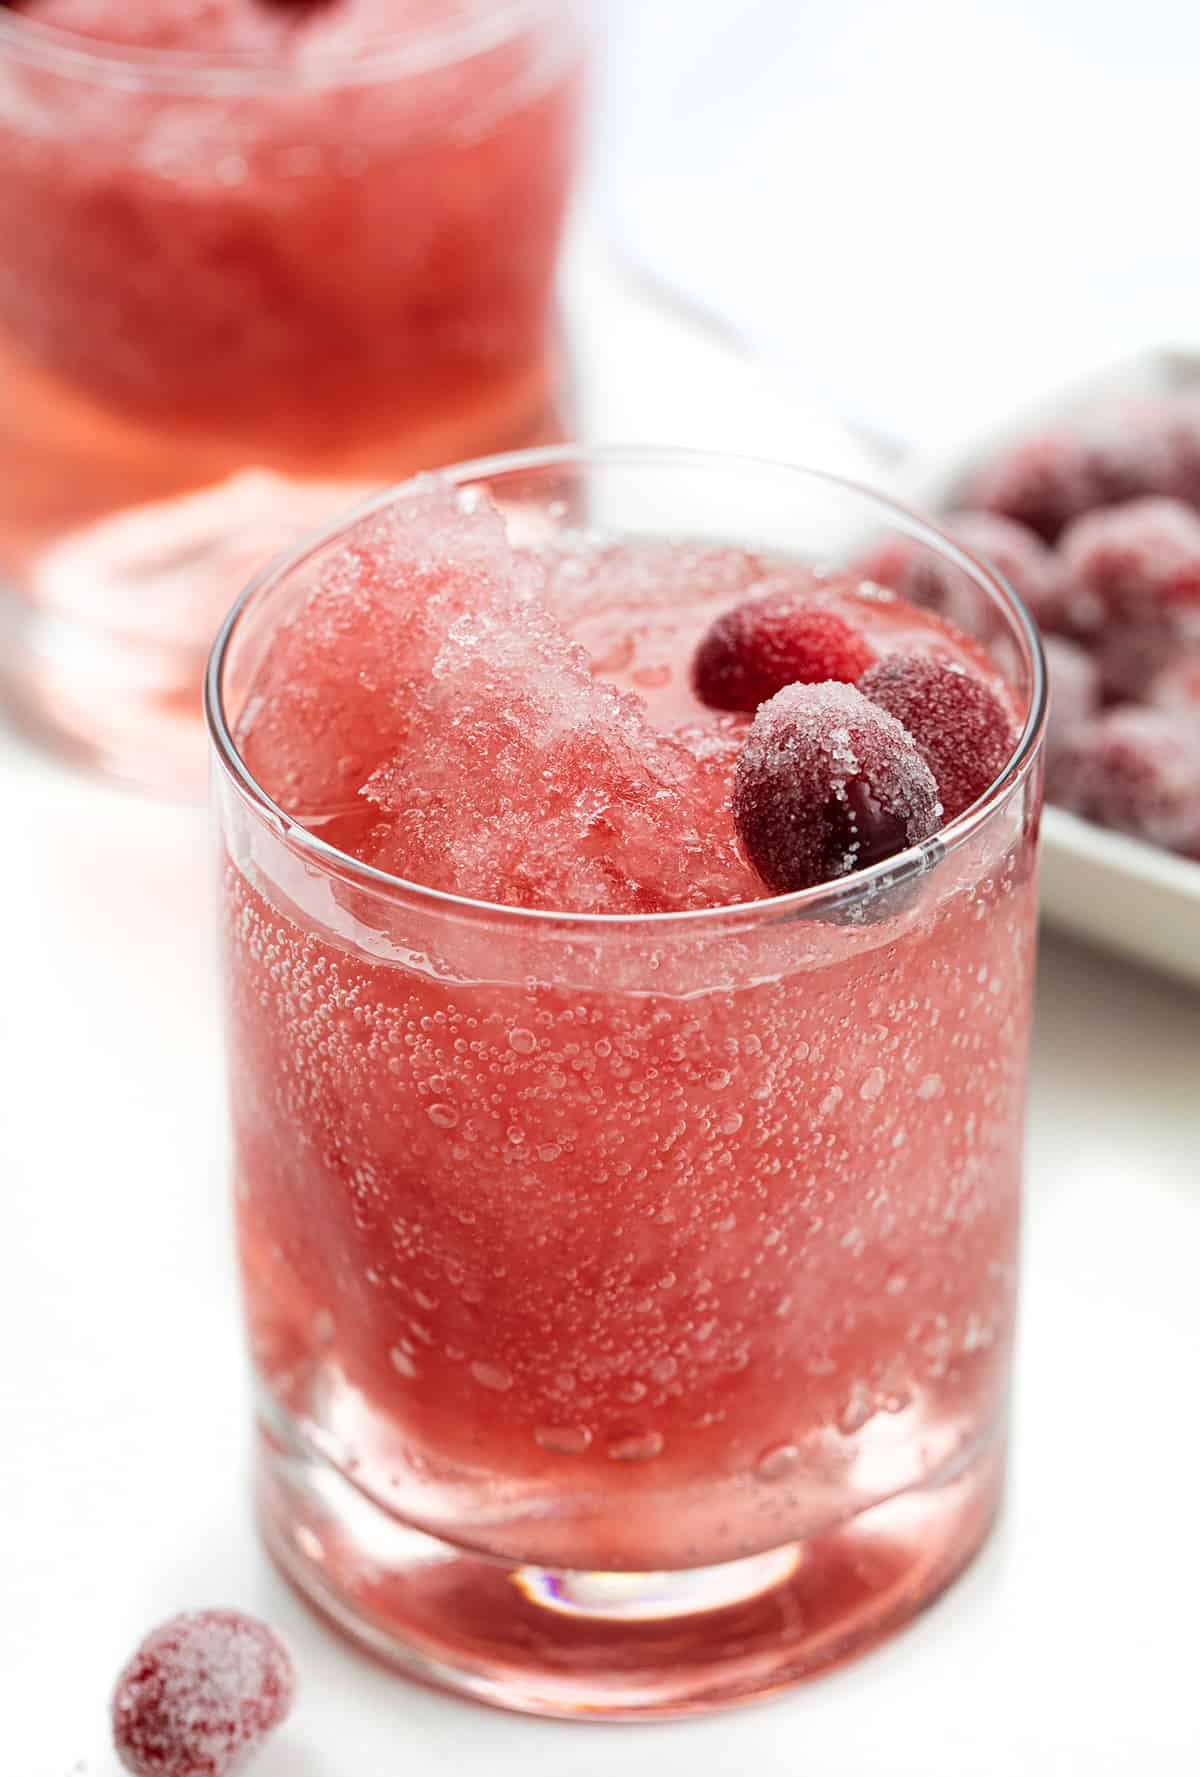 Glasses of Cranberry slush with Sugared Cranberries.